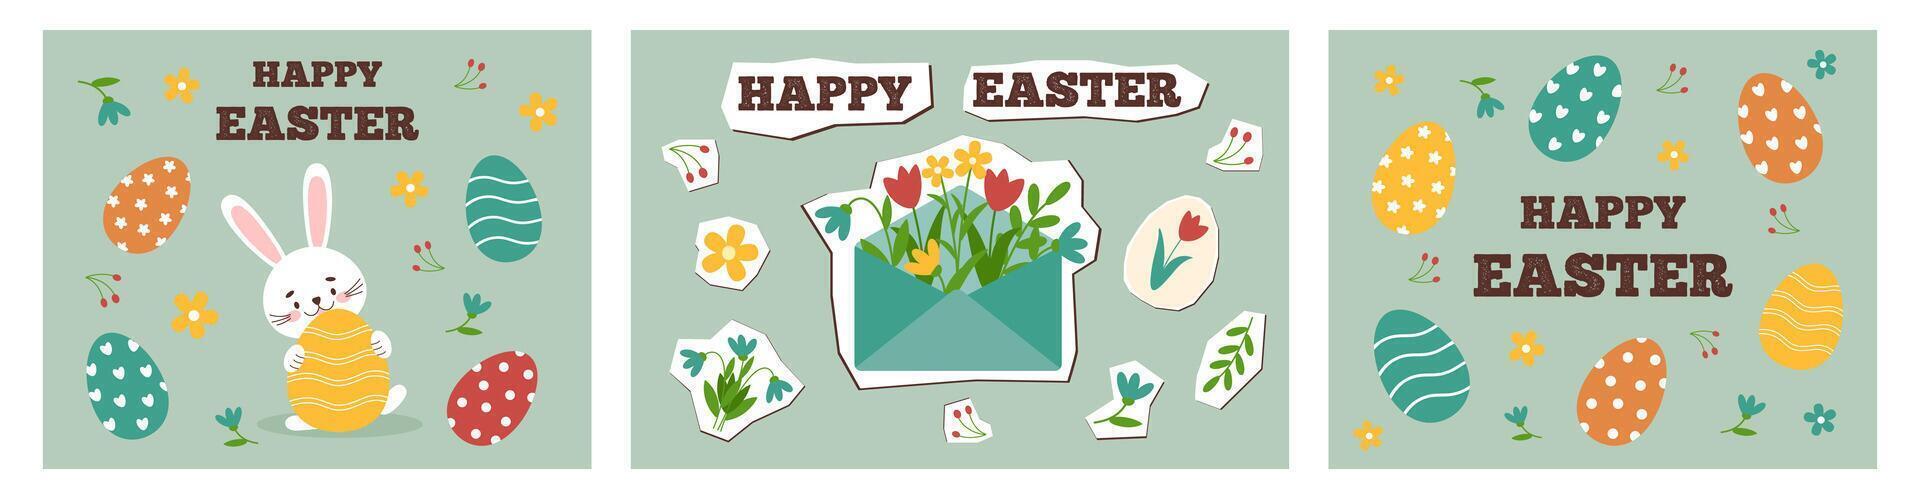 Happy easter cards set in new nostalgia style. Minimal card designs with cute applique elements, vector illustration template.